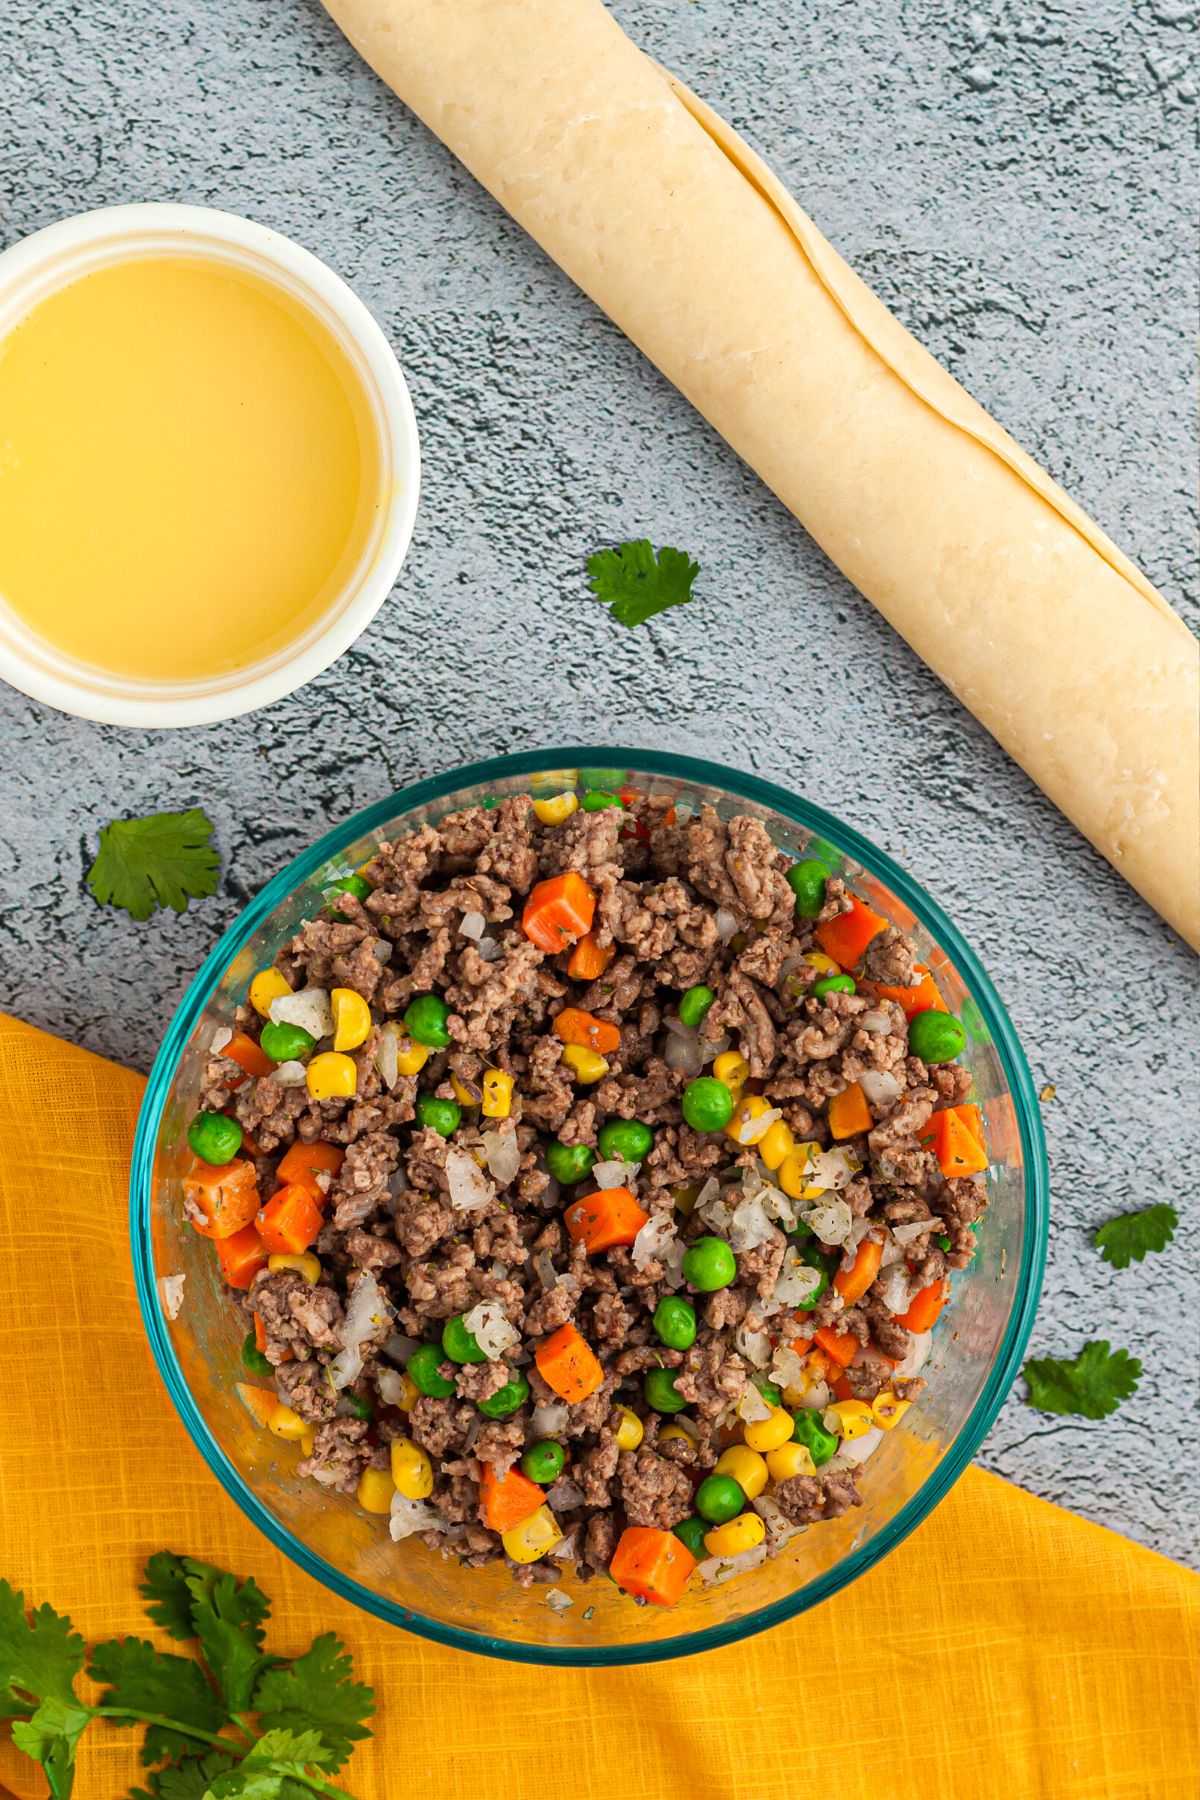 Ground beef mixed with vegetables in a clear glass bowl on a light blue table